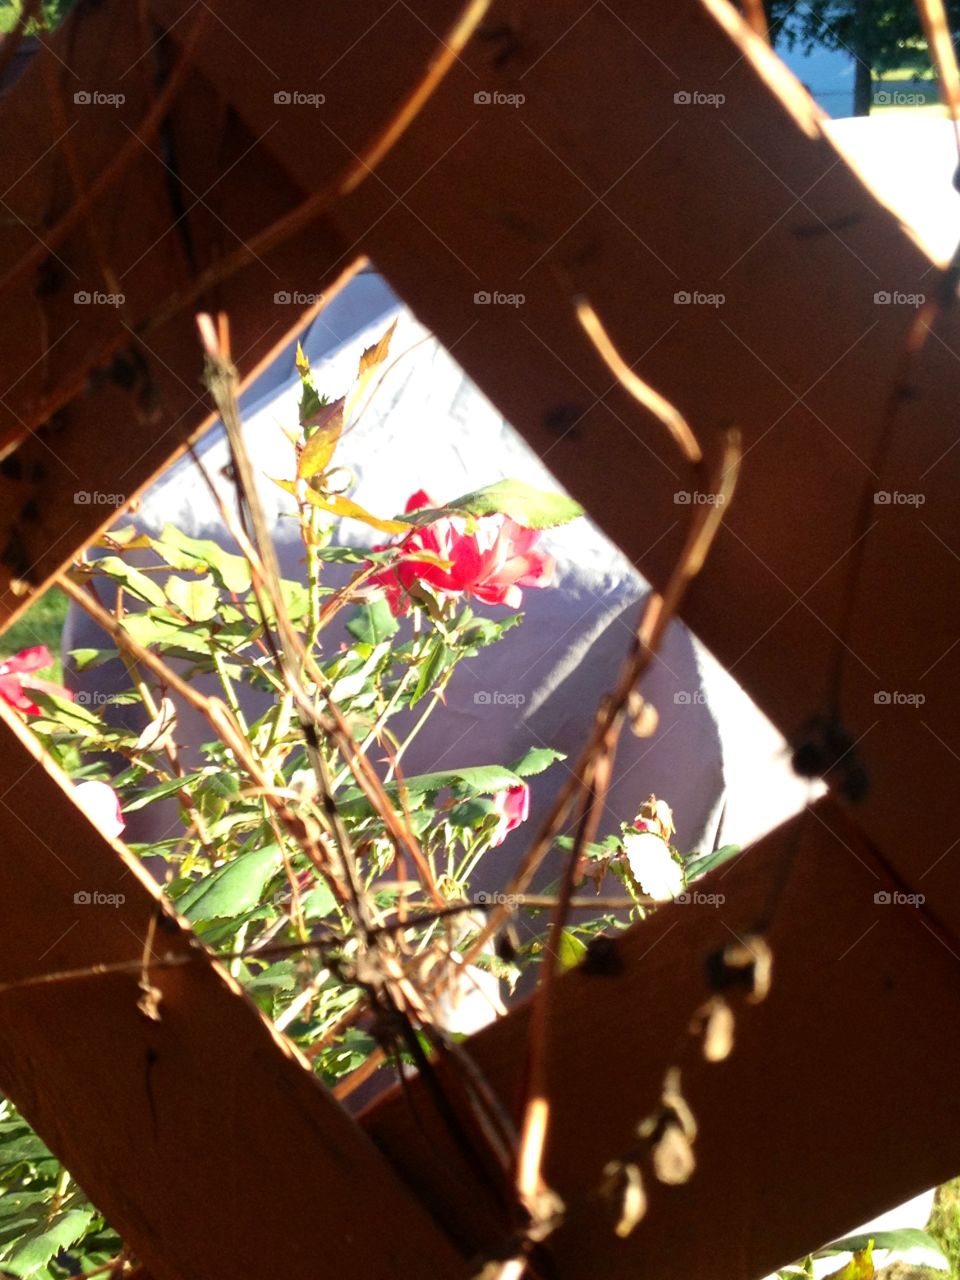 Flower through the fence of summer